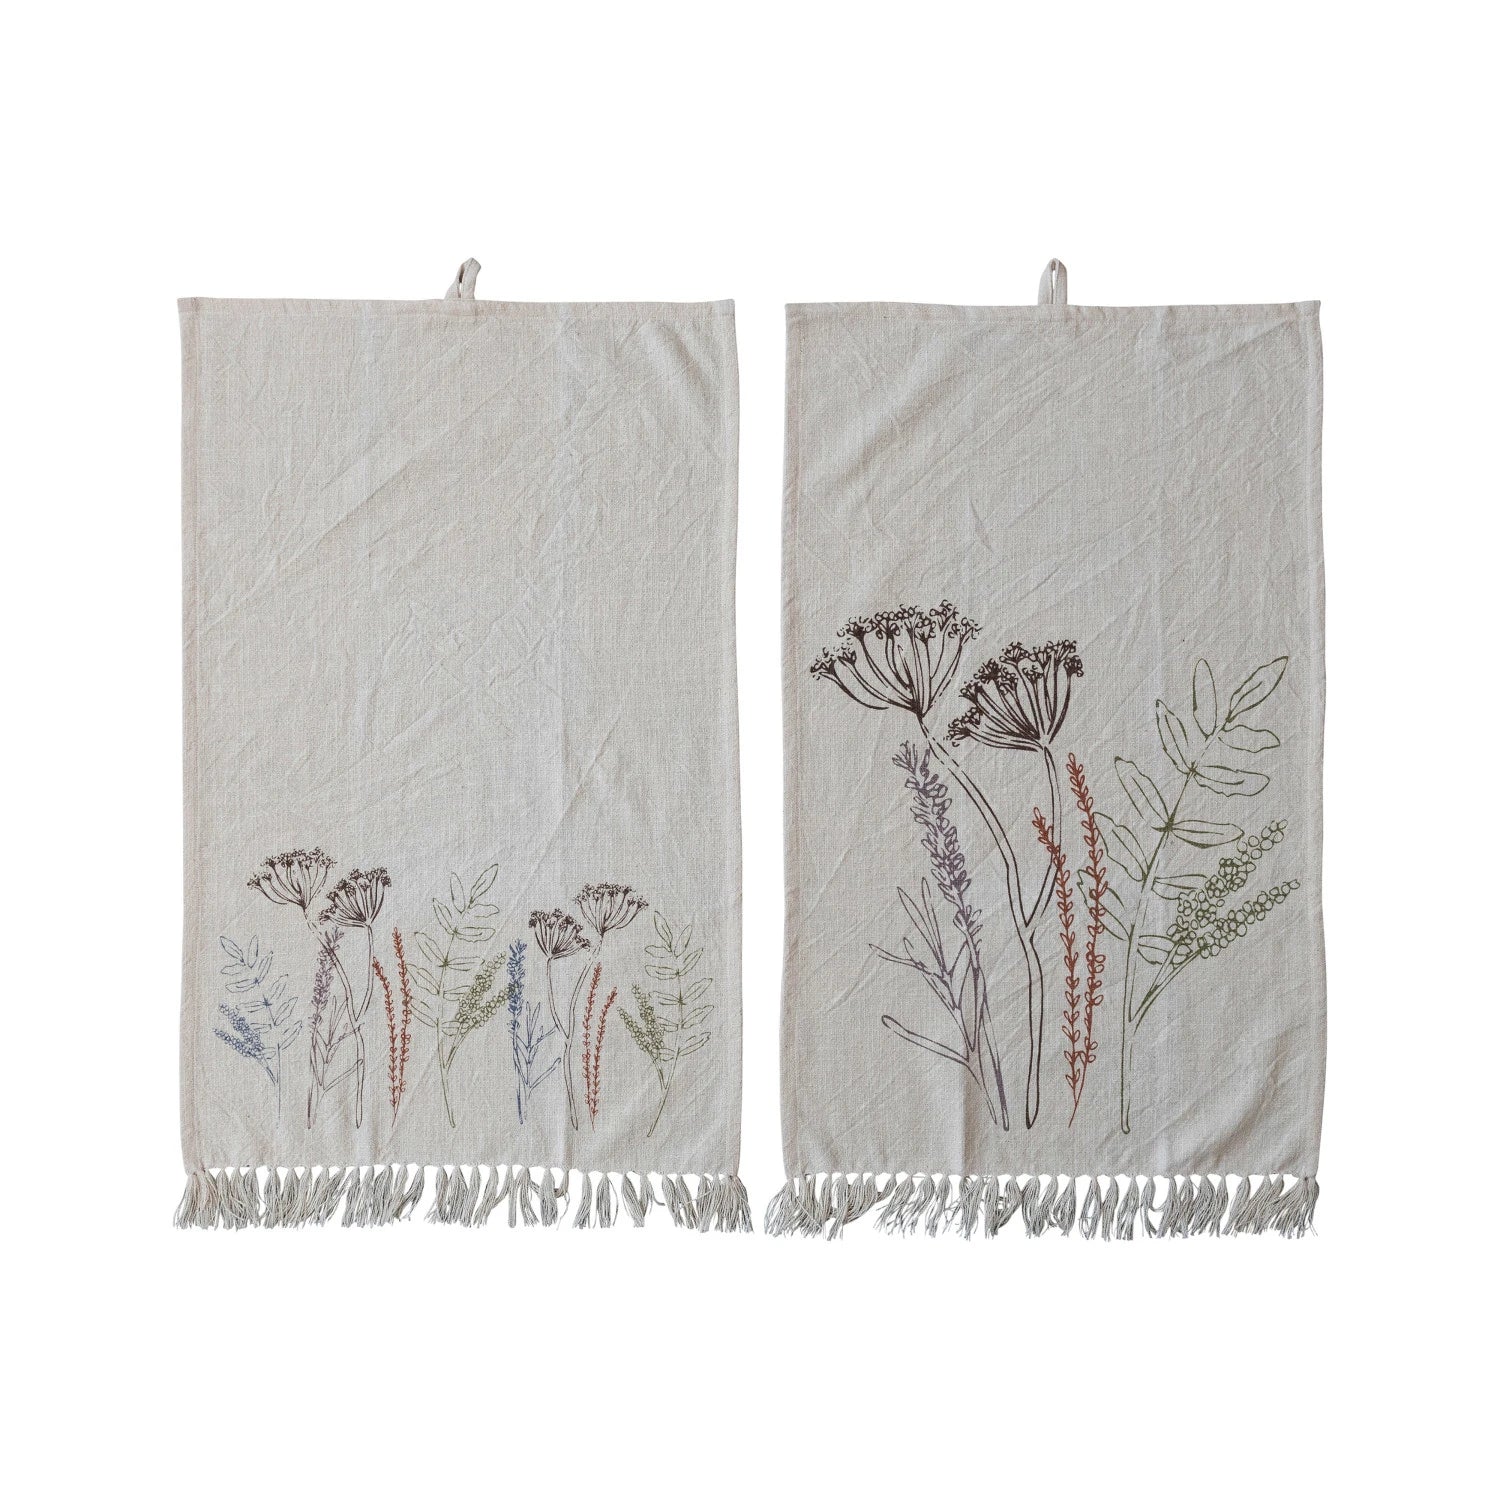 Cotton printed kitchen towel with assorted flowers and fringe.